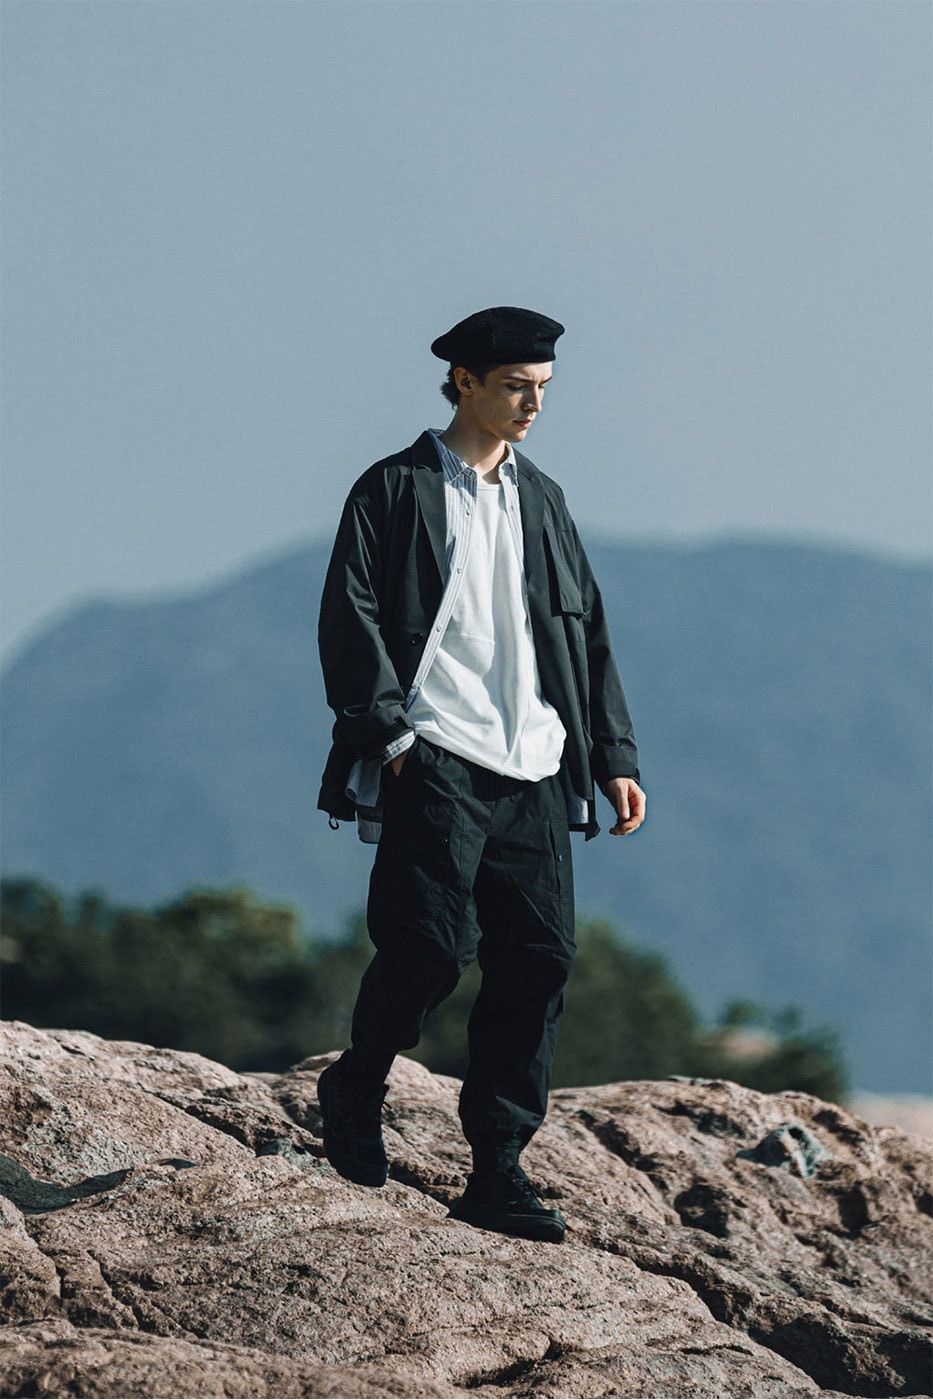 Comfy Outdoor Garments Spring/Summer 2022 Collection HBX Release Info Buy Price Shell Jackets Water Resistant Proof Cargo Pants Nylon Pockets